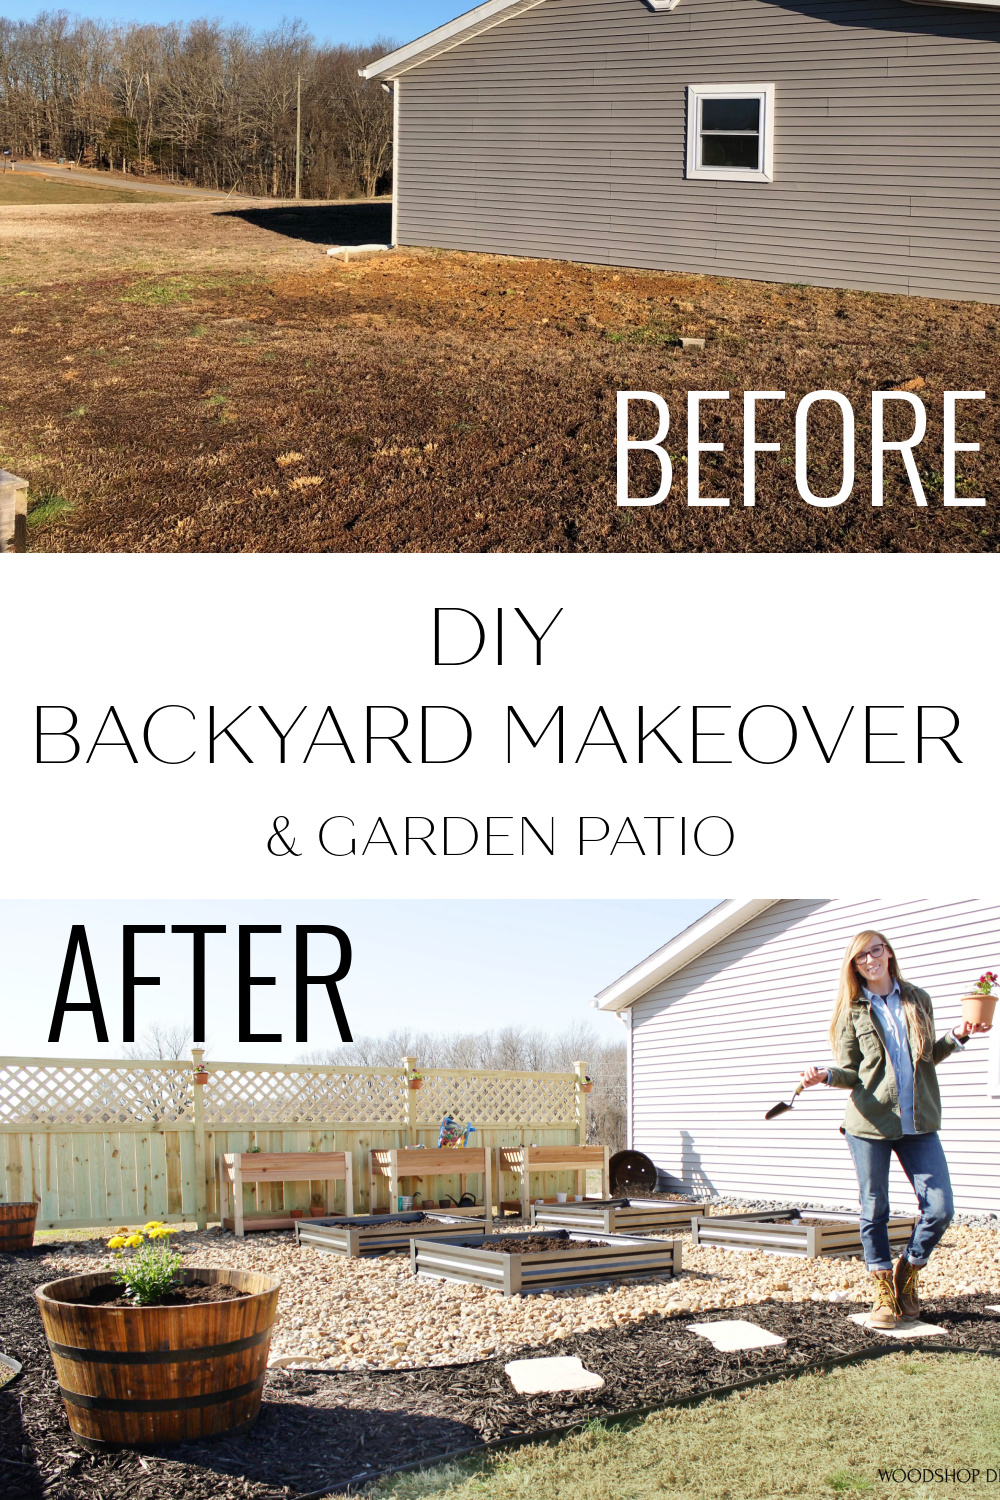 Pinterest collage of before and after DIY backyard makeover and garden patio